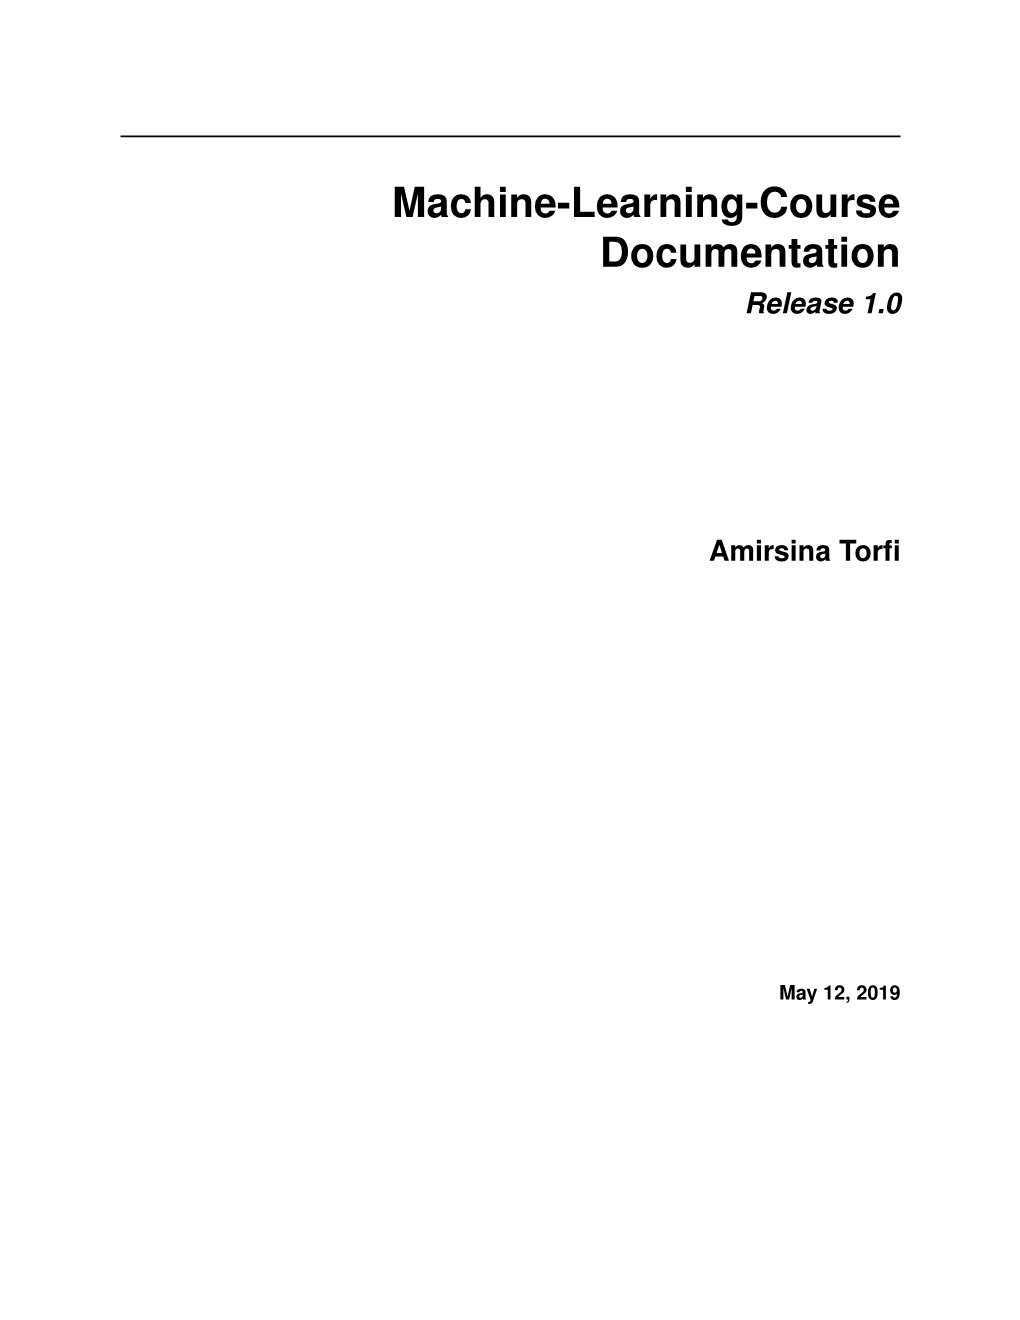 Machine-Learning-Course Documentation Release 1.0